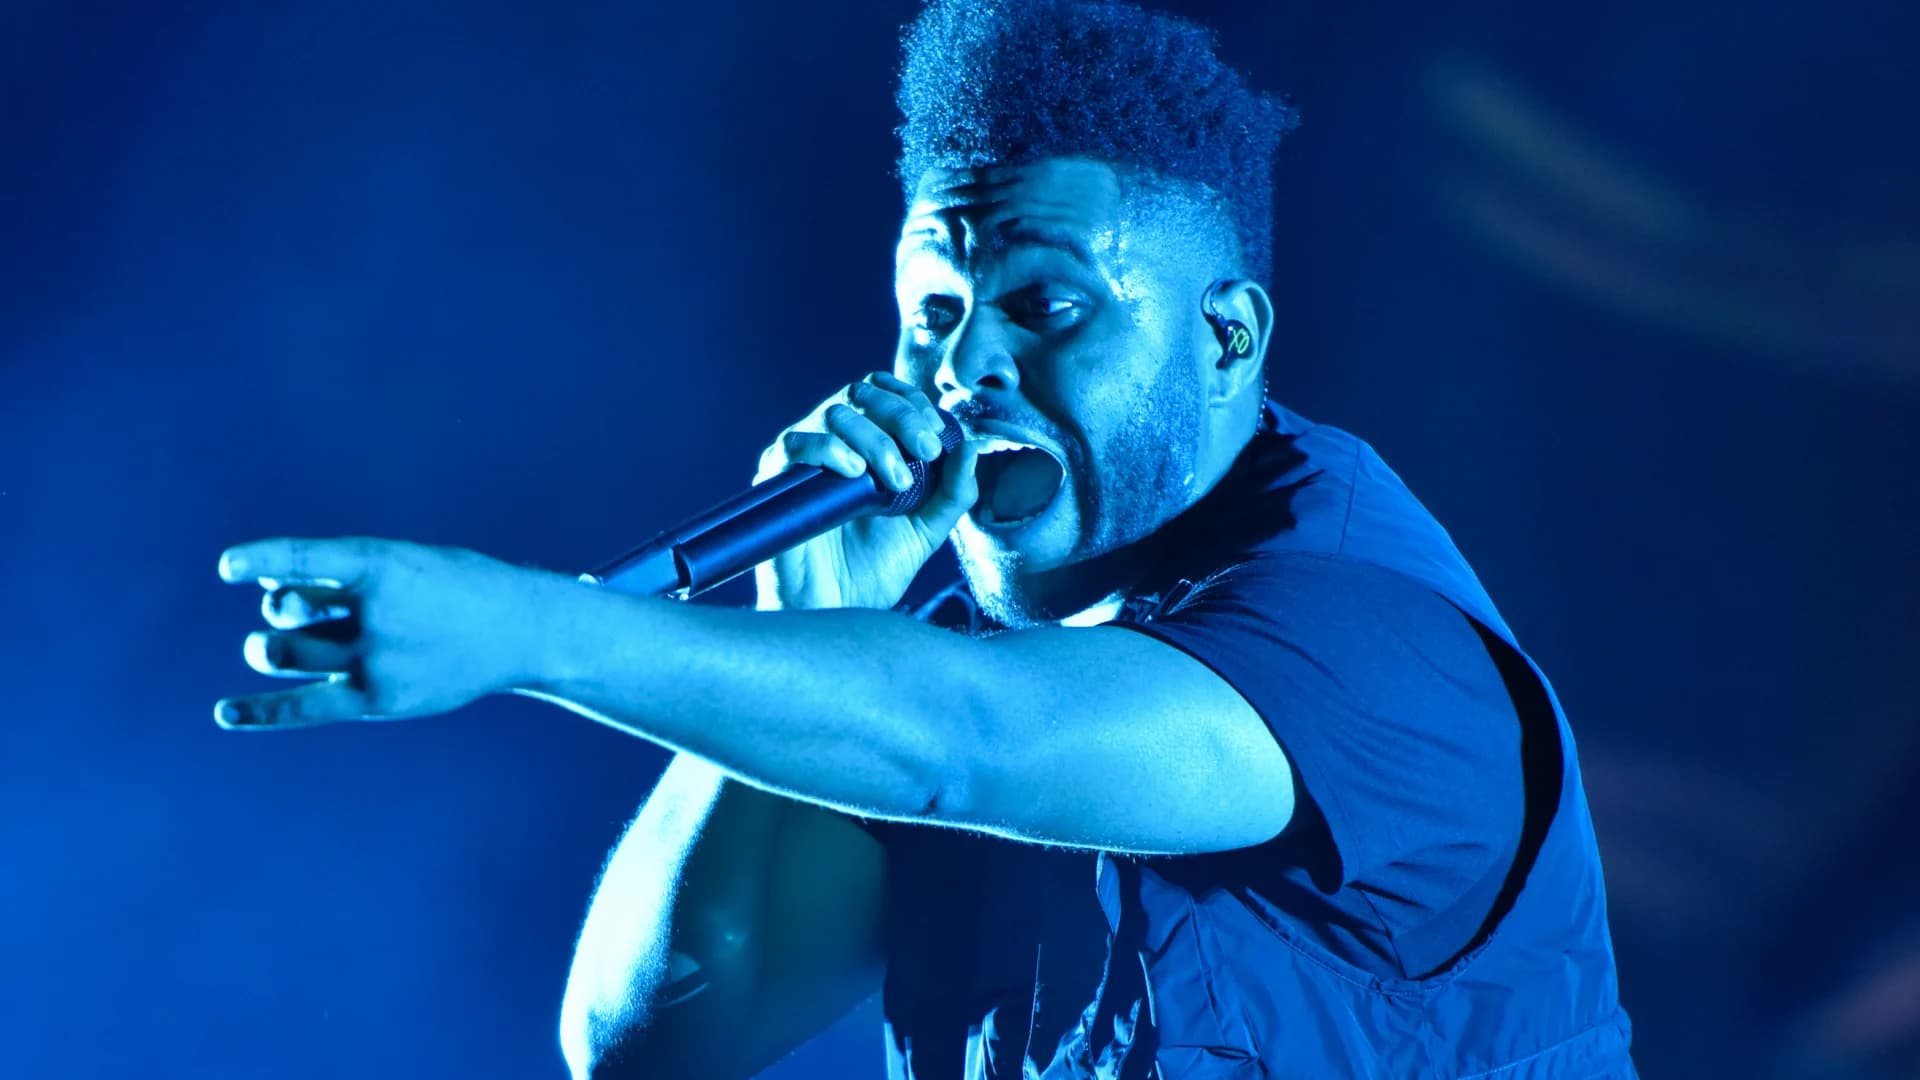 The Weeknd to perform at Pepsi Super Bowl halftime show